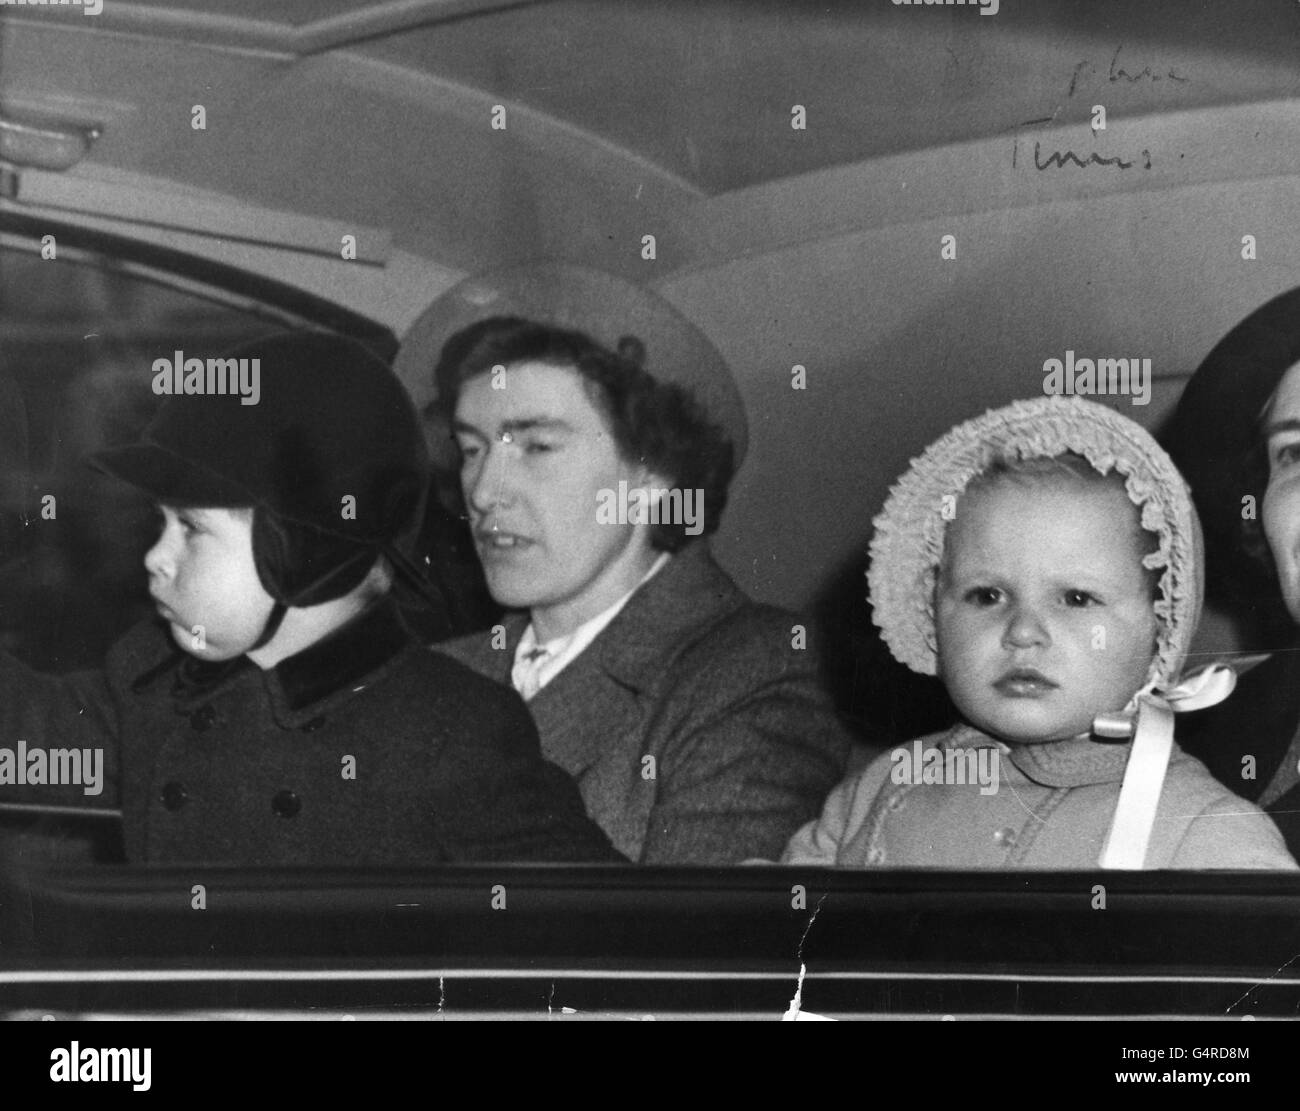 Prince Charles and Princess Anne with nanny Helen Lightbody, at King's Cross Station, London, where they met their grandparents, King George VI and Queen Elizabeth to travel to Sandringham. Princess Elizabeth and the Duke of Edinburgh had left for their Commonwealth tour. Stock Photo